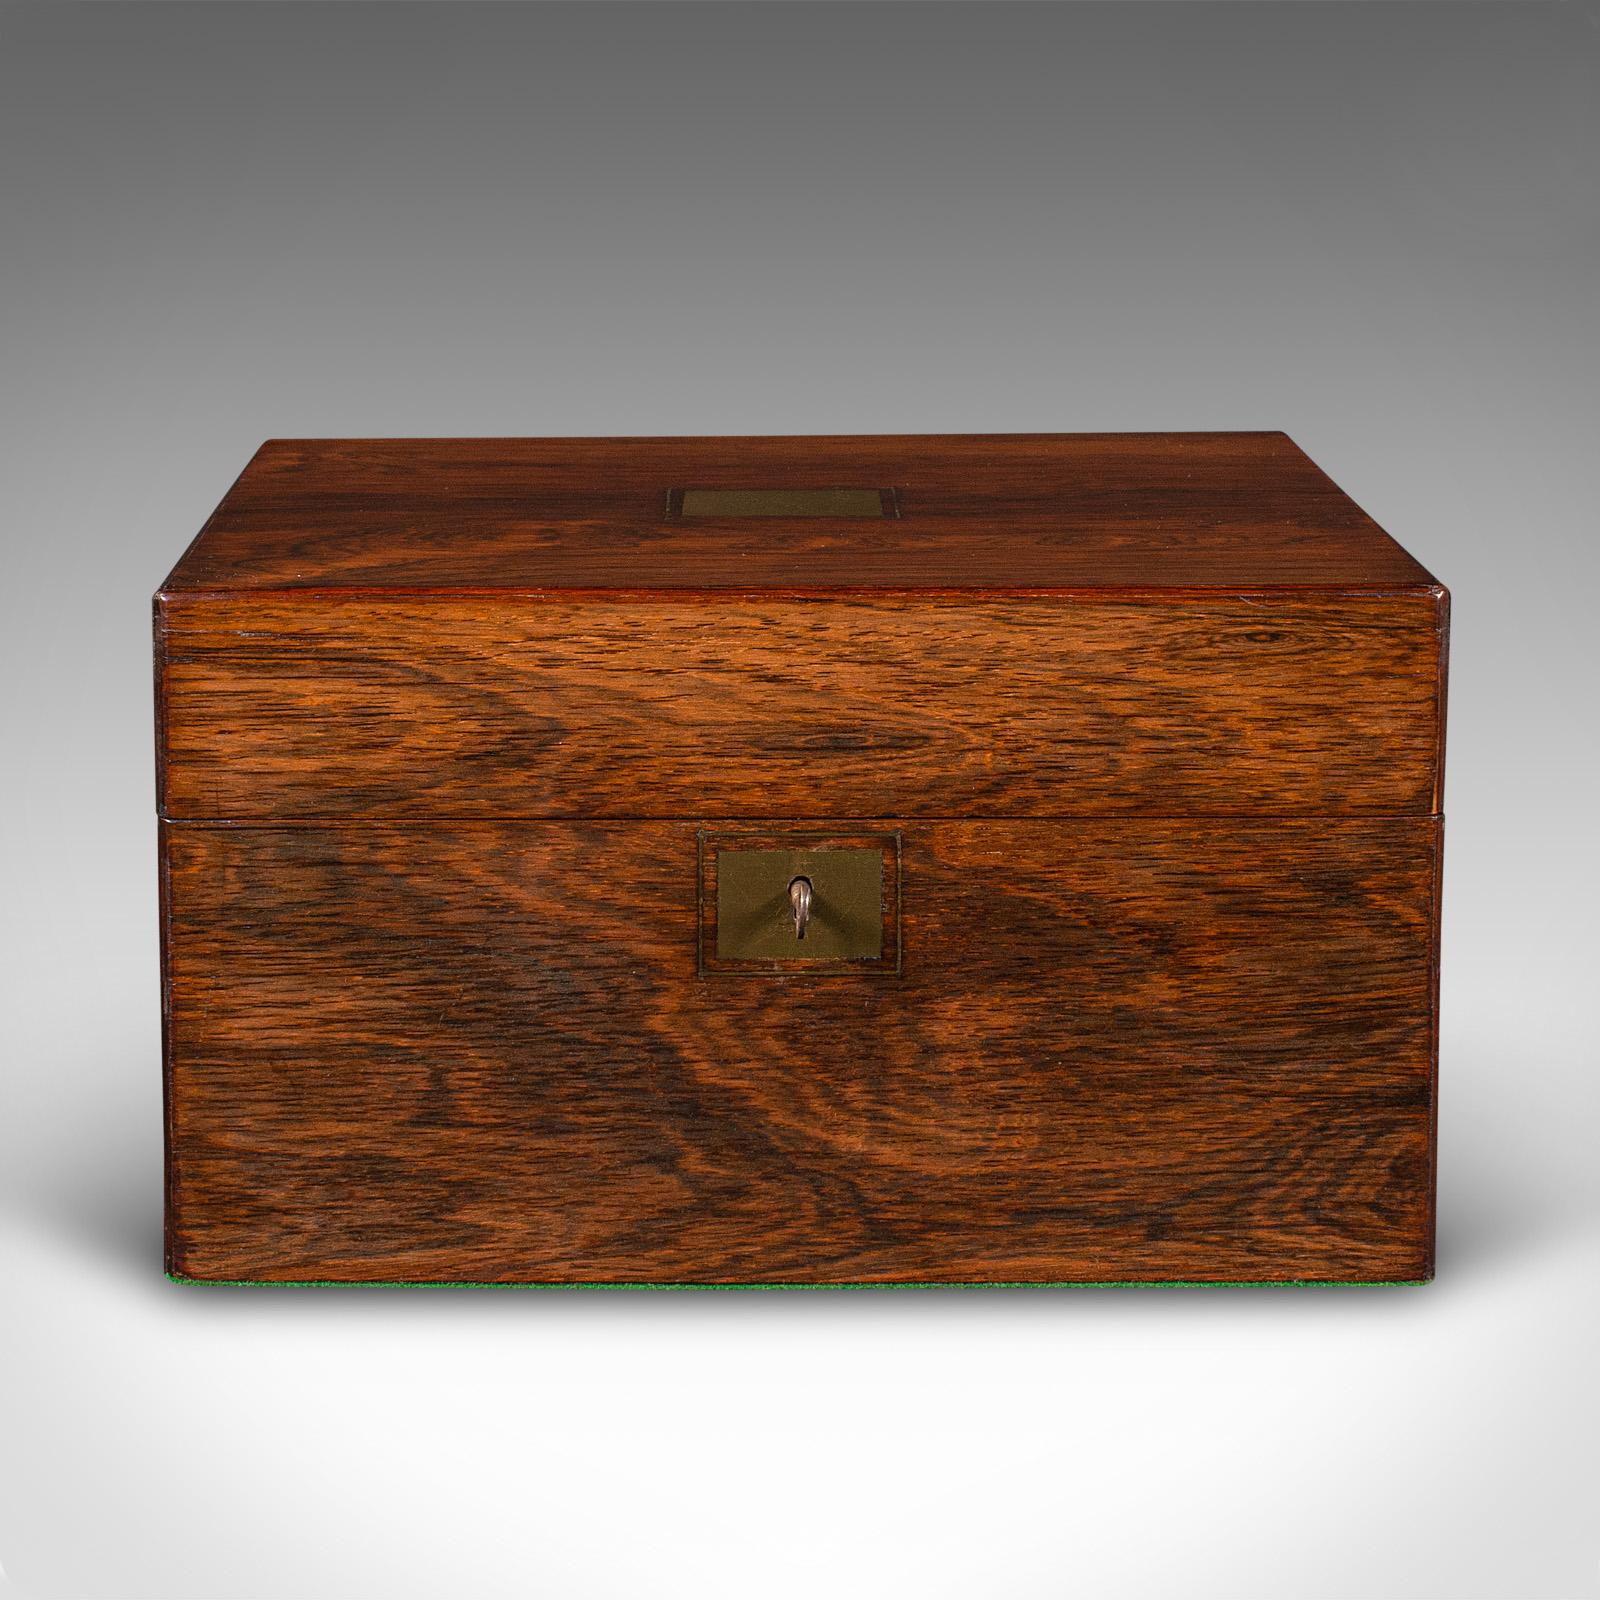 British Antique Vanity Case, English, Travelling Dressing Table Box, Regency, Circa 1820 For Sale